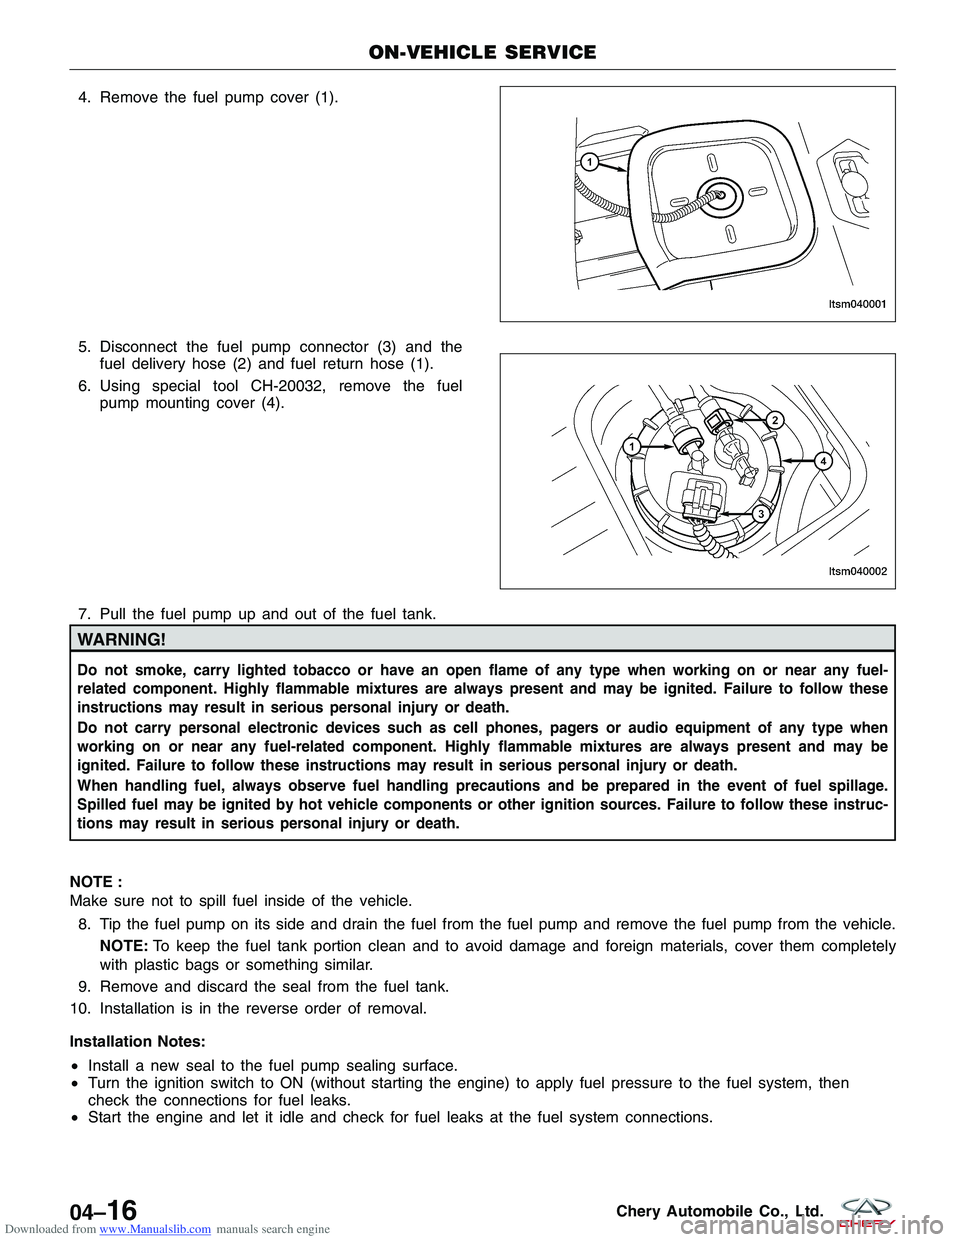 CHERY TIGGO 2009  Service Repair Manual Downloaded from www.Manualslib.com manuals search engine 4. Remove the fuel pump cover (1).
5. Disconnect the fuel pump connector (3) and thefuel delivery hose (2) and fuel return hose (1).
6. Using s